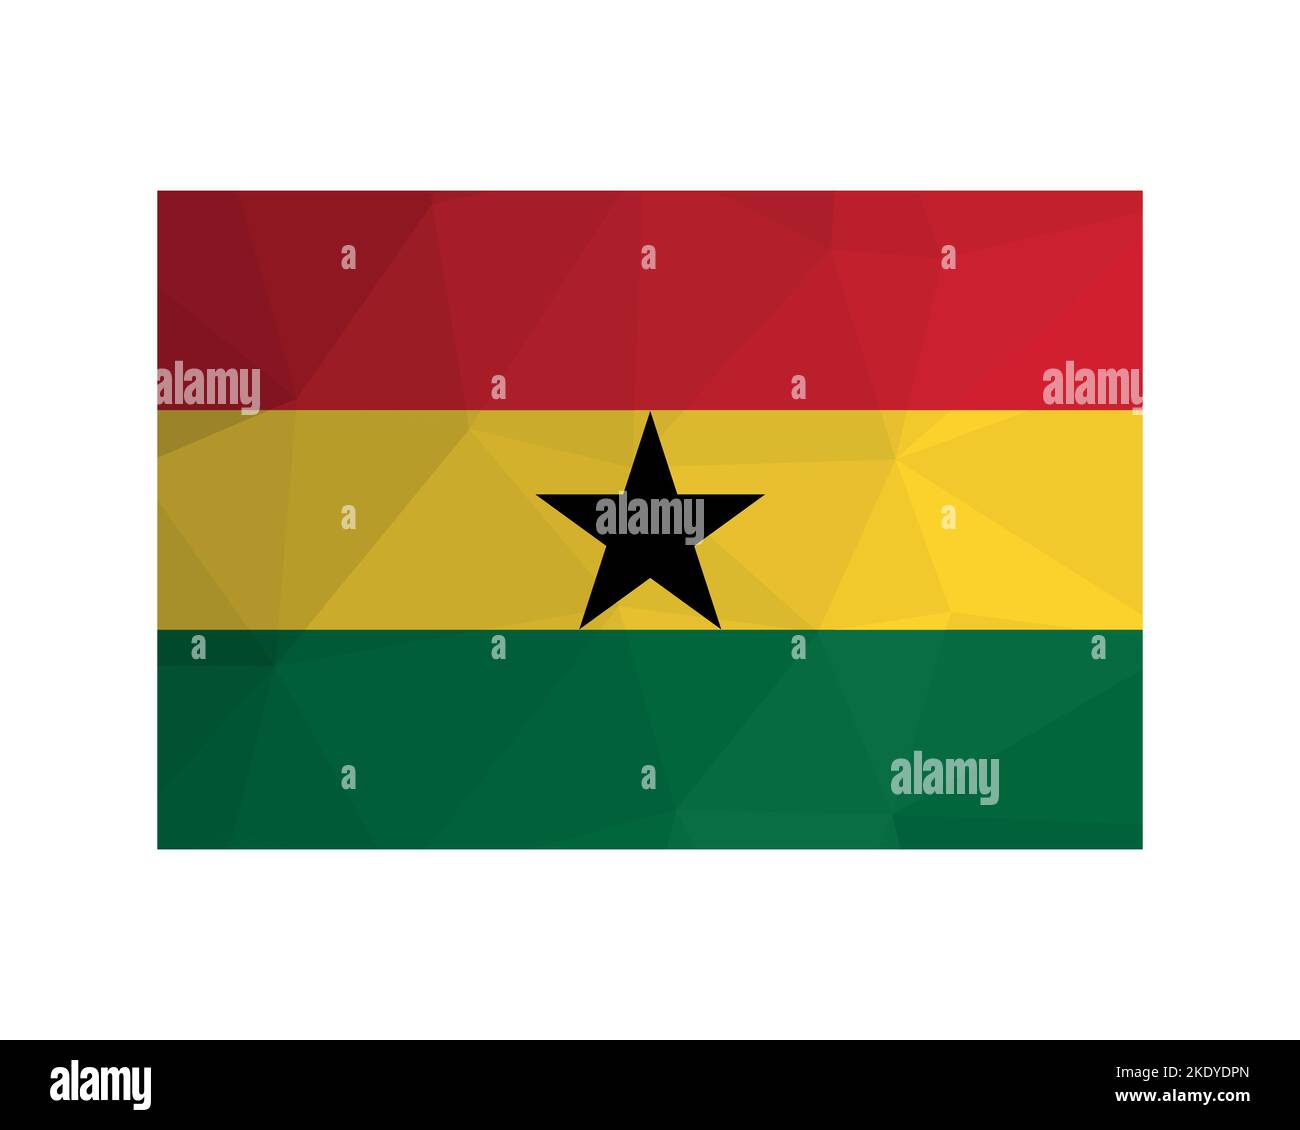 Vector illustration. Official ensign of Ghana. National flag with red, yellow, green stripes and black star. Creative design in low poly style with tr Stock Vector